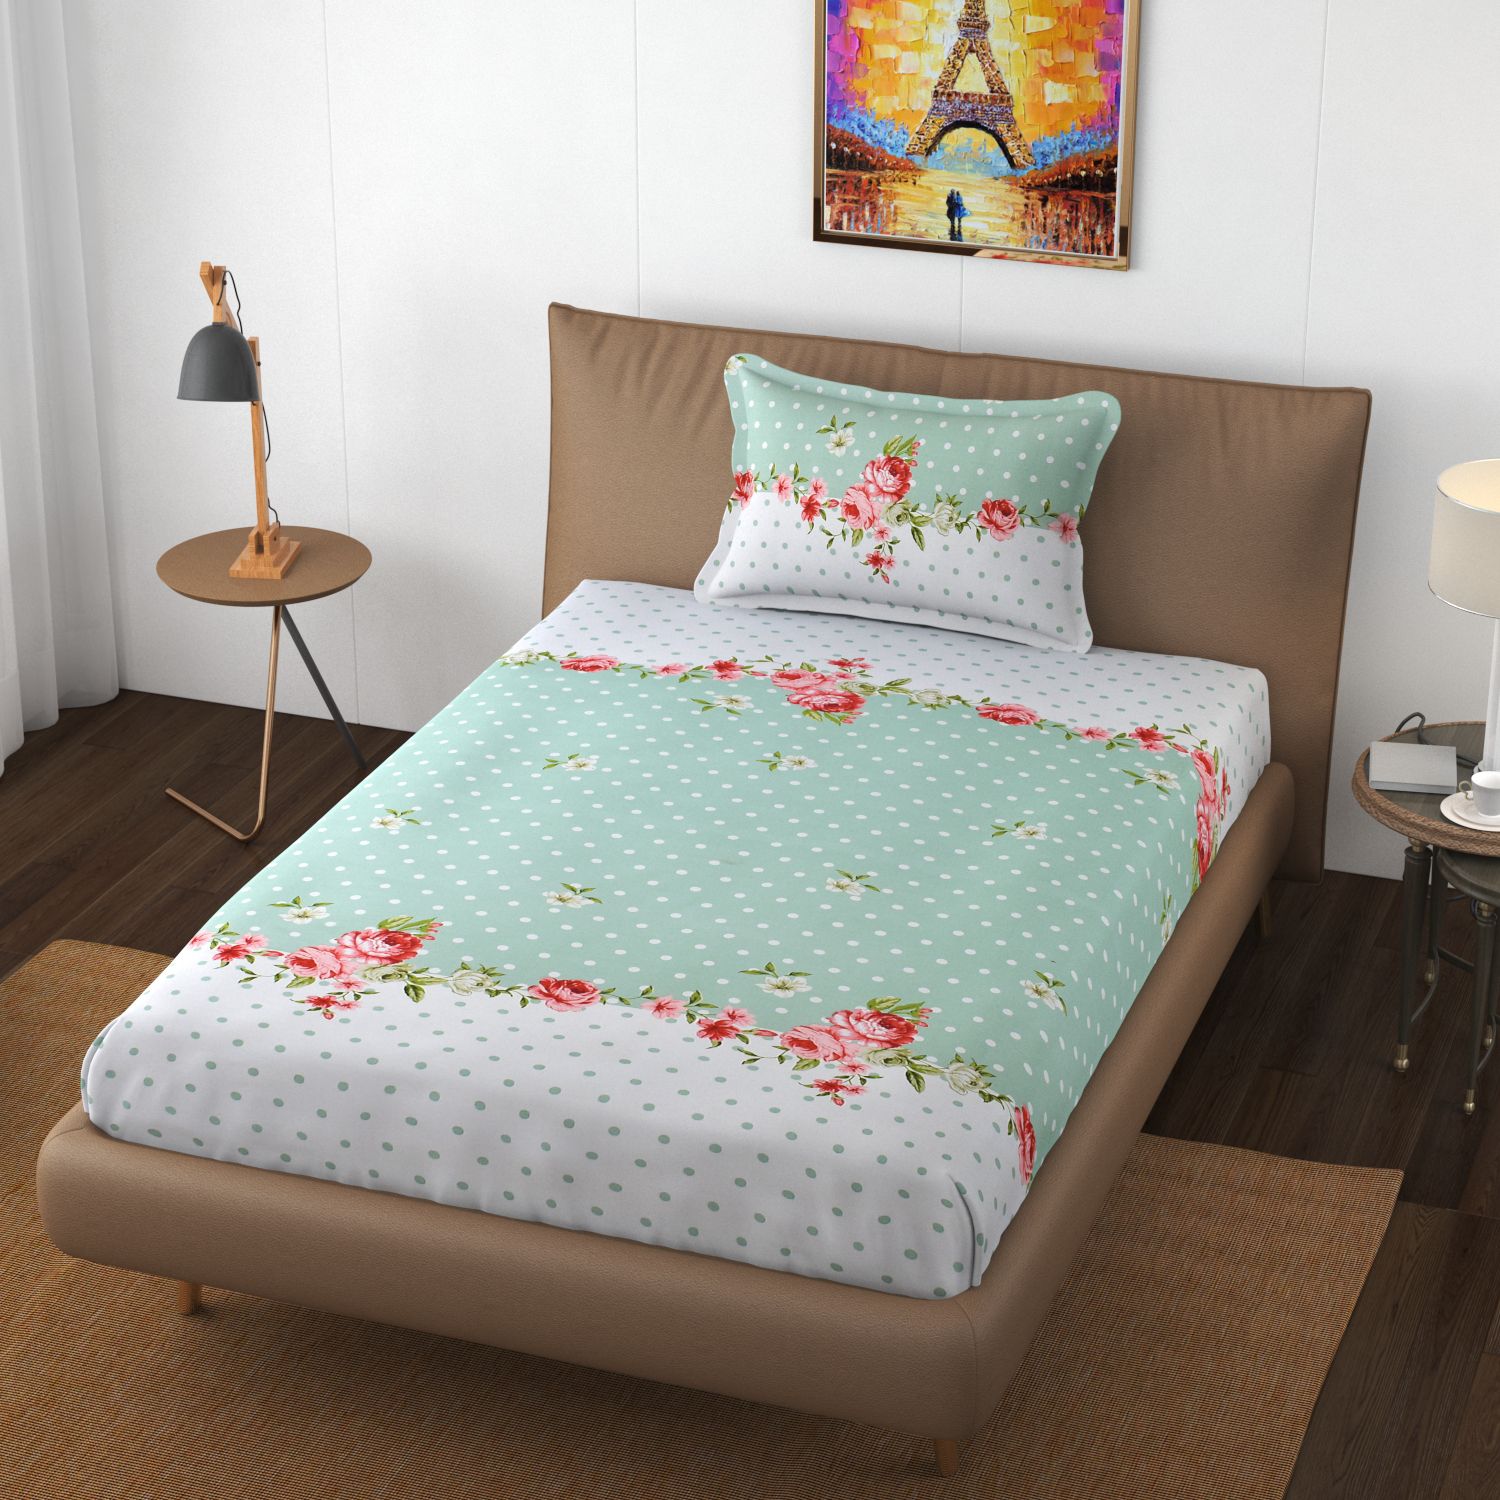     			Apala Microfiber Floral Single Bedsheet with 1 Pillow Cover - Green